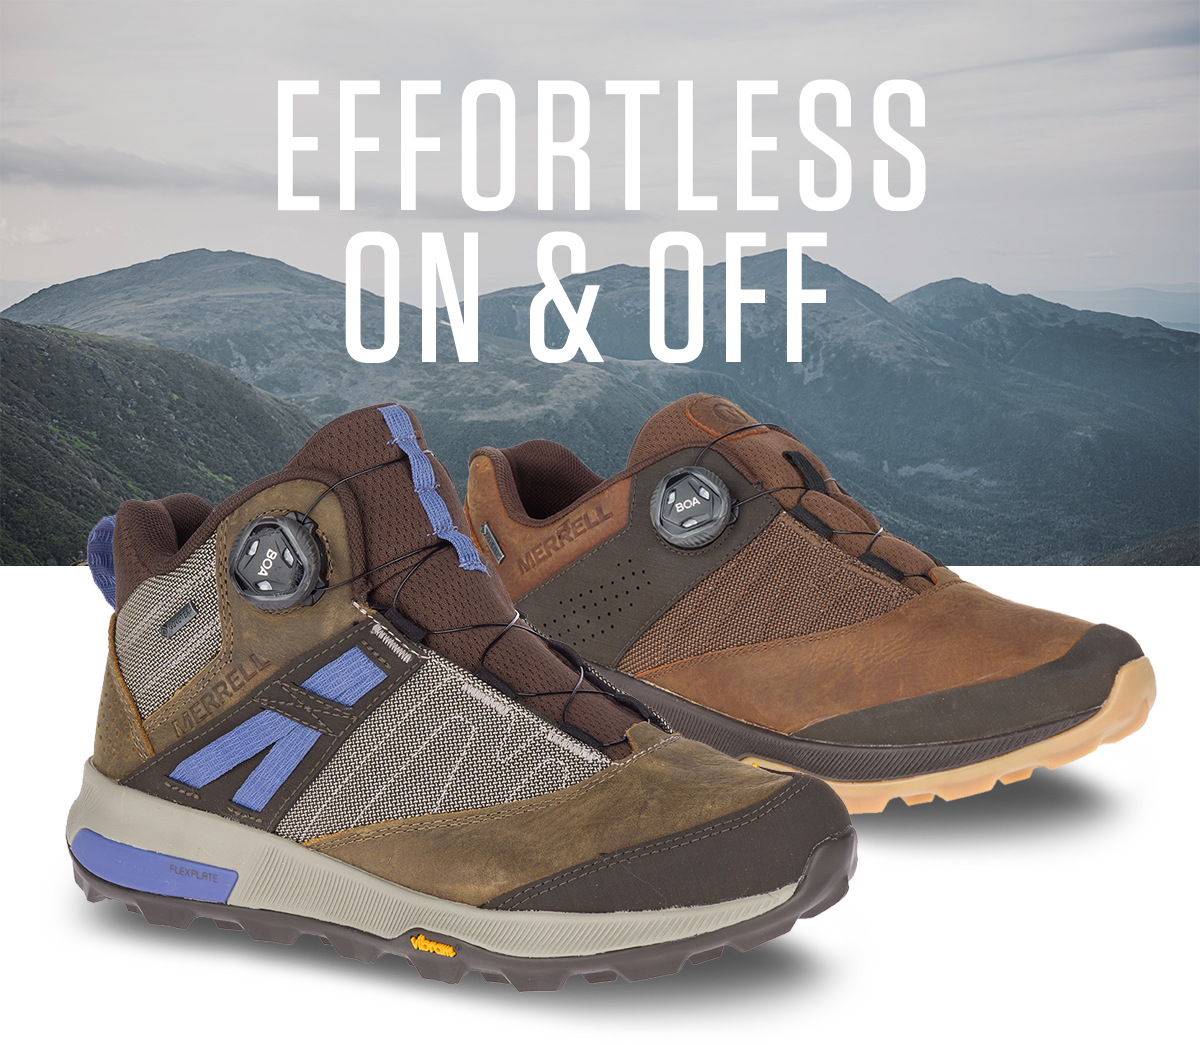 MERRELL: Dial Fast, Effortless, Precision Fit | Milled